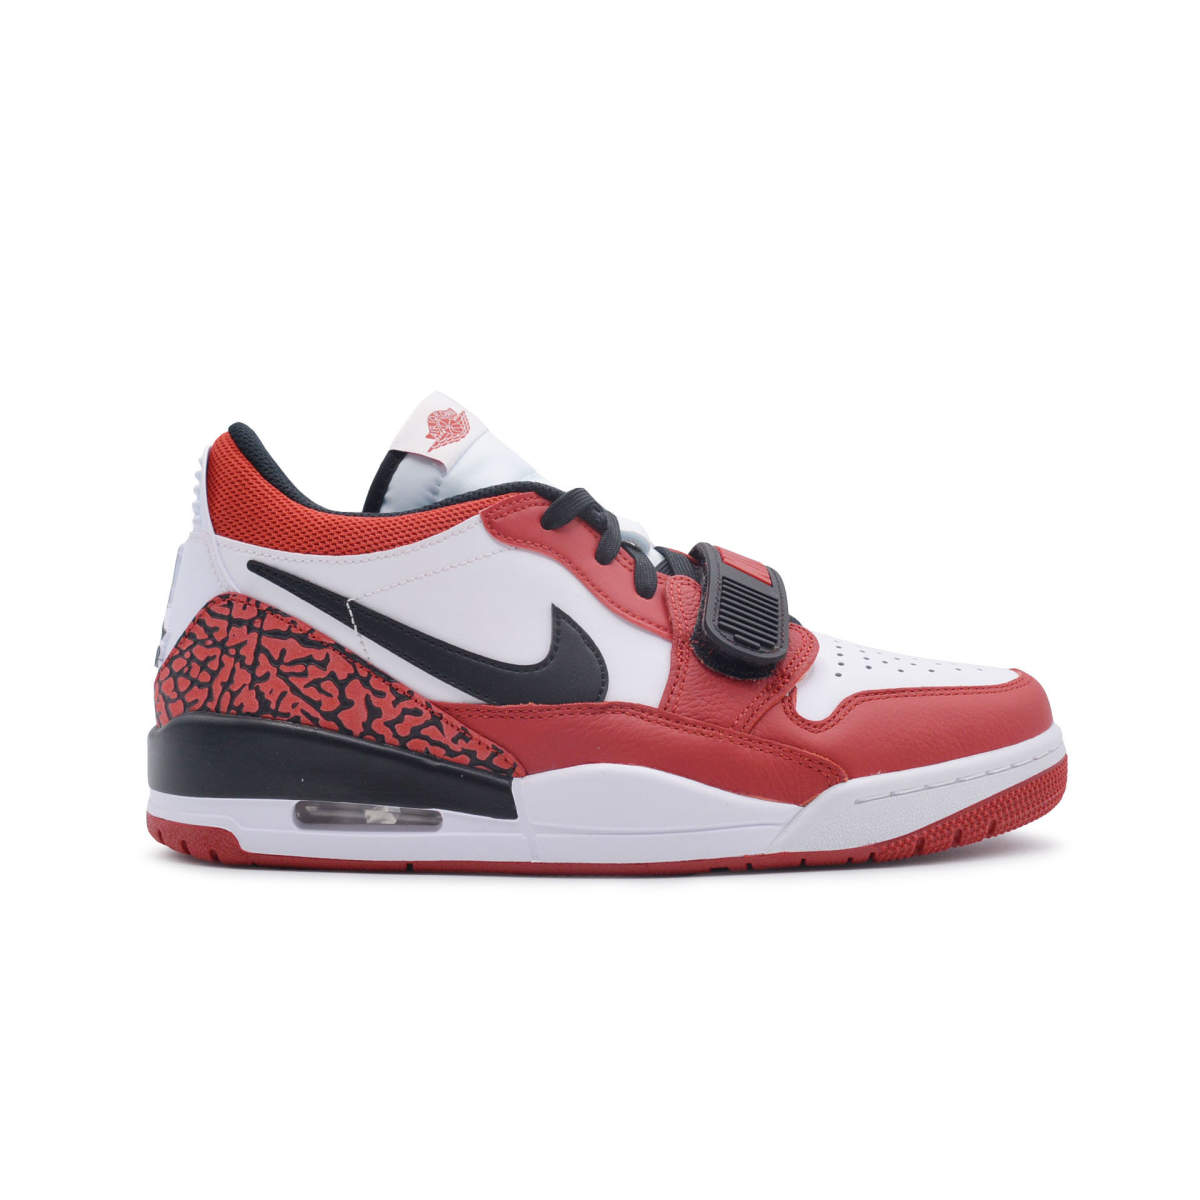 Legacy 312 low chicago